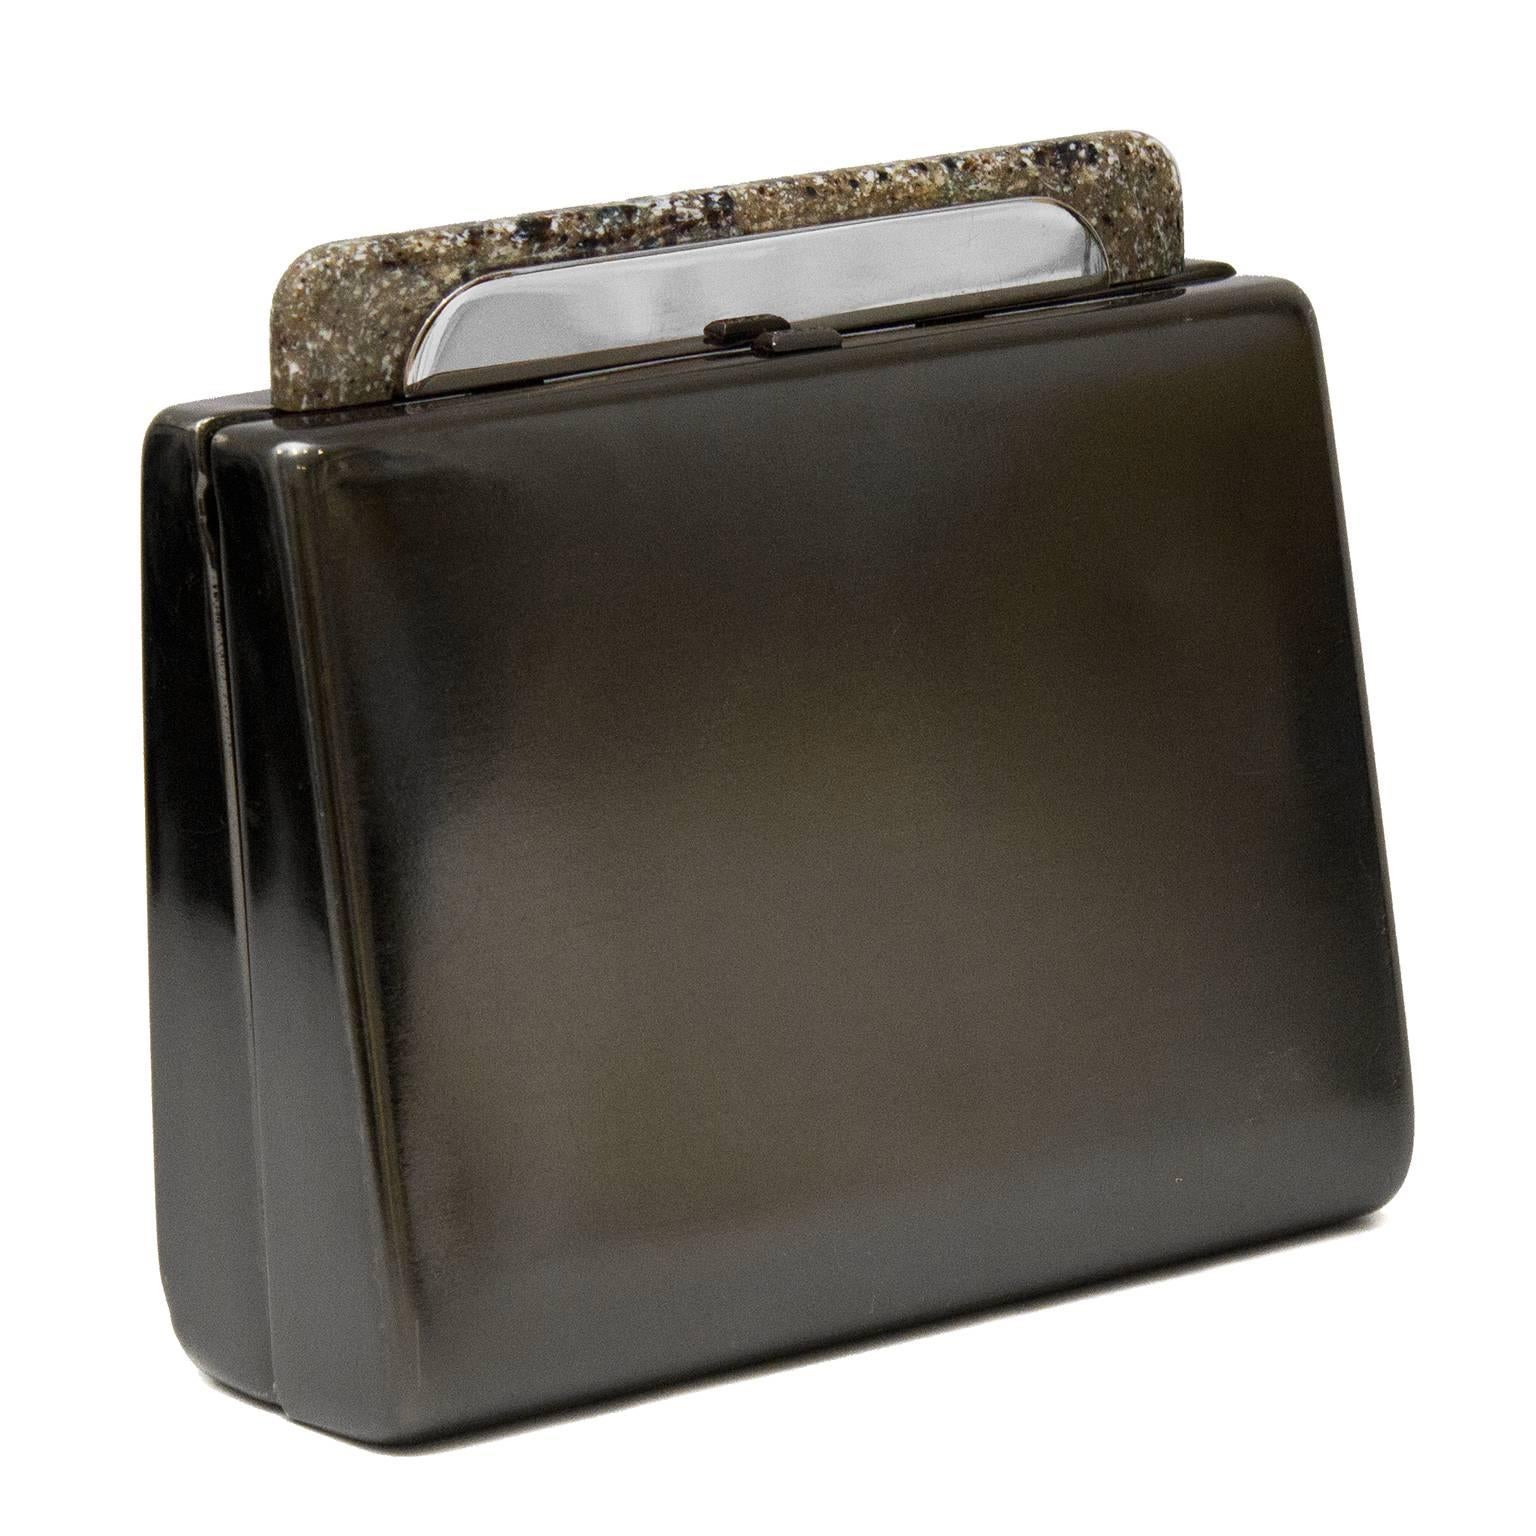 Pewter hard case minaudiere Rodo clutch dating from the 1980s with interesting faux granite detailing at clasp. Light wear throughout. Metallic silver leather interior with small pocket - clean, with minor wear. 21